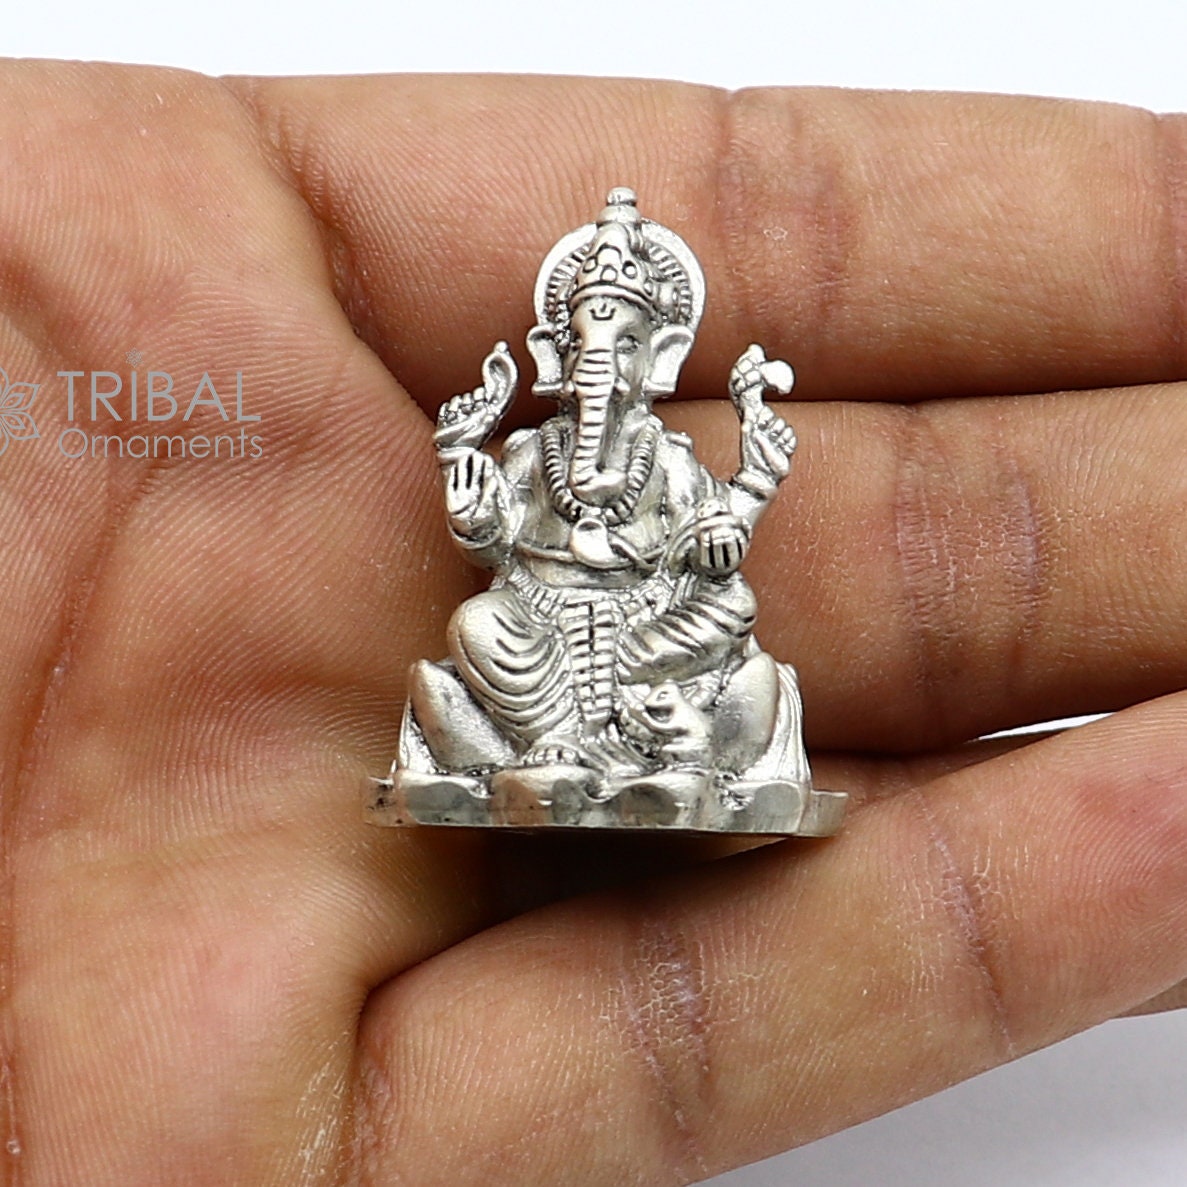 925 Sterling silver Divine lord idol Ganesha statue art, best puja figurine for home temple for wealth and prosperity art730 - TRIBAL ORNAMENTS